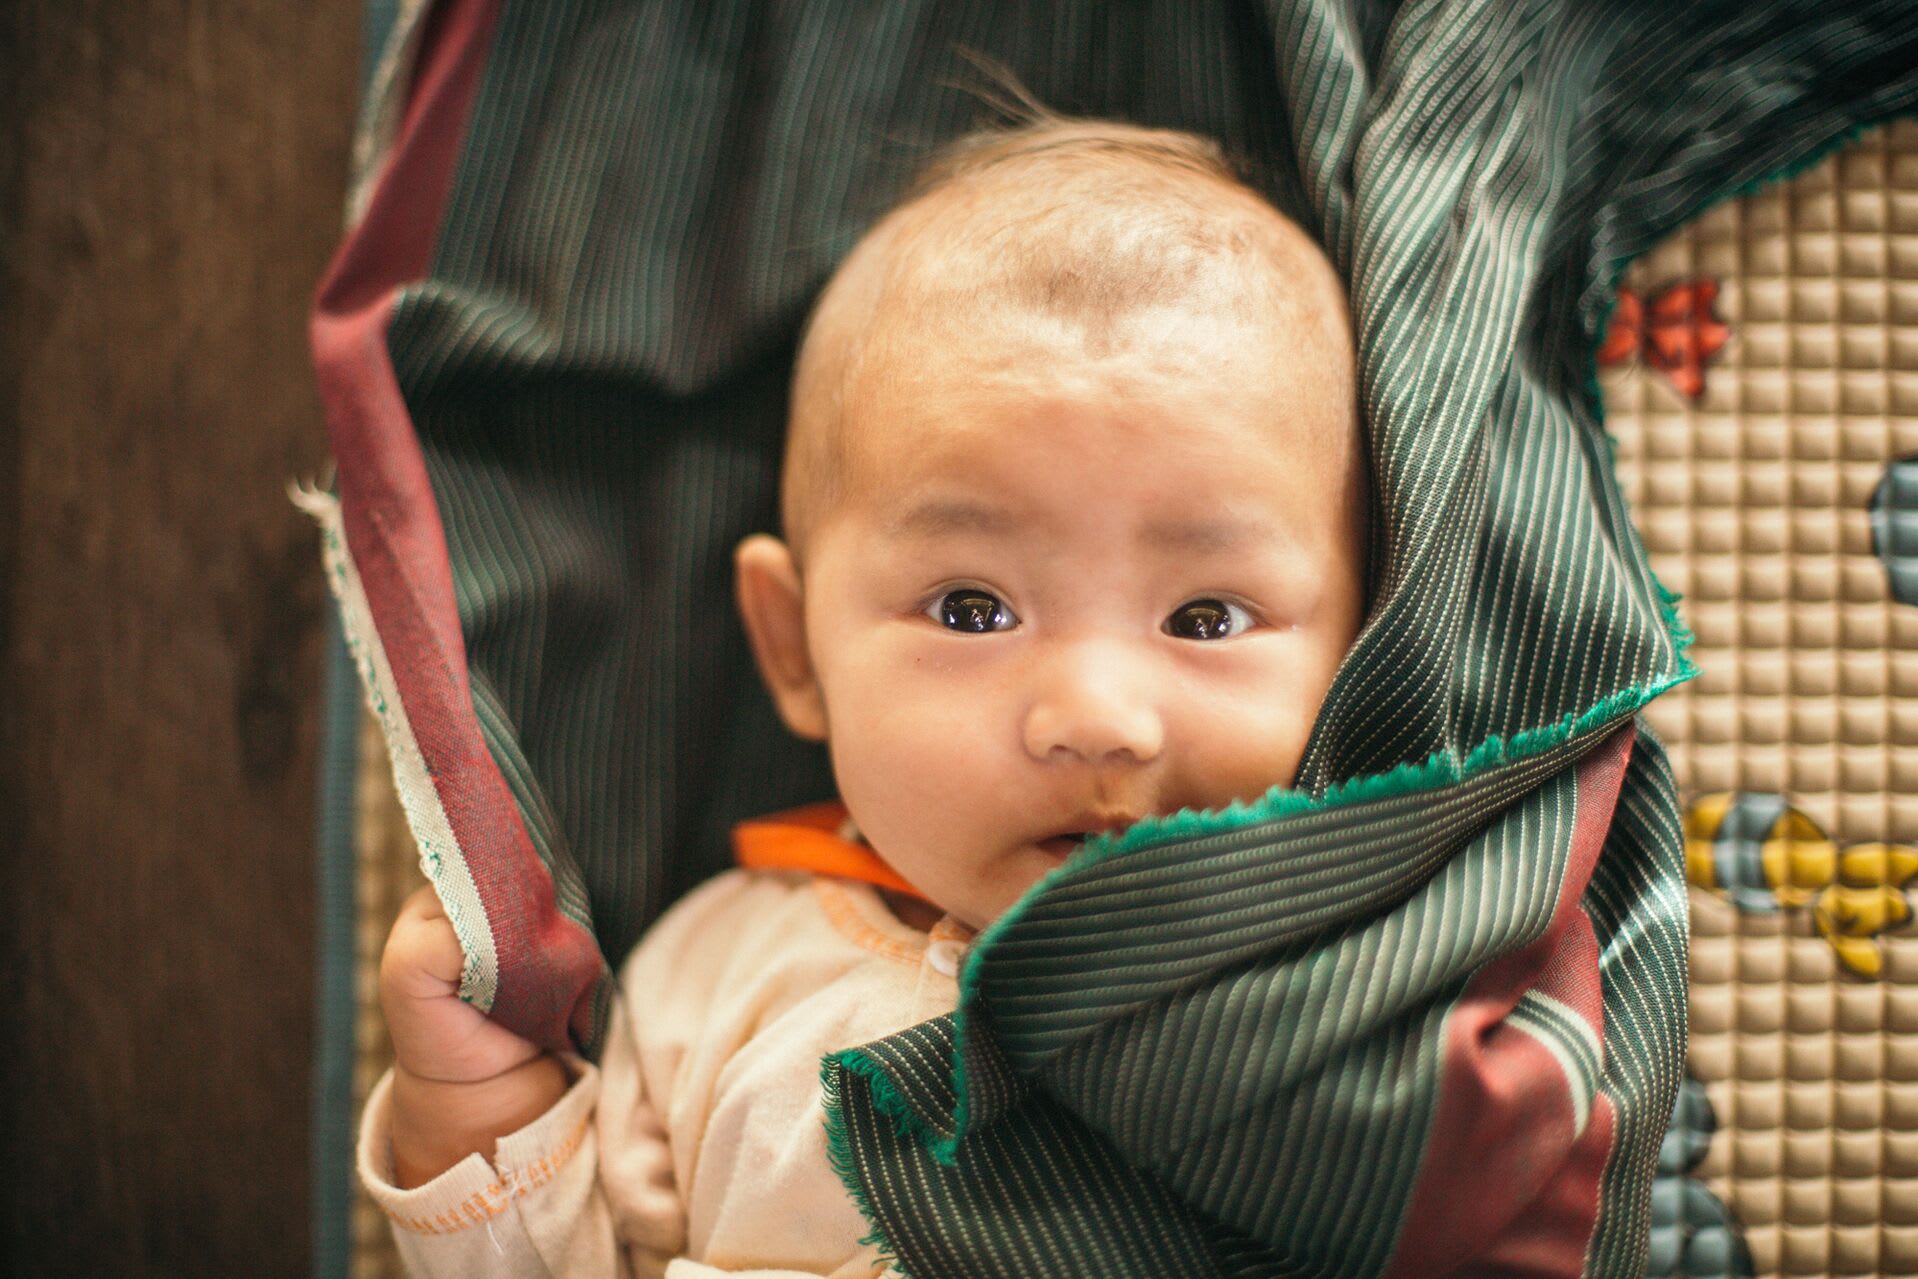 A close up of baby wrapped in a green and red blanket.